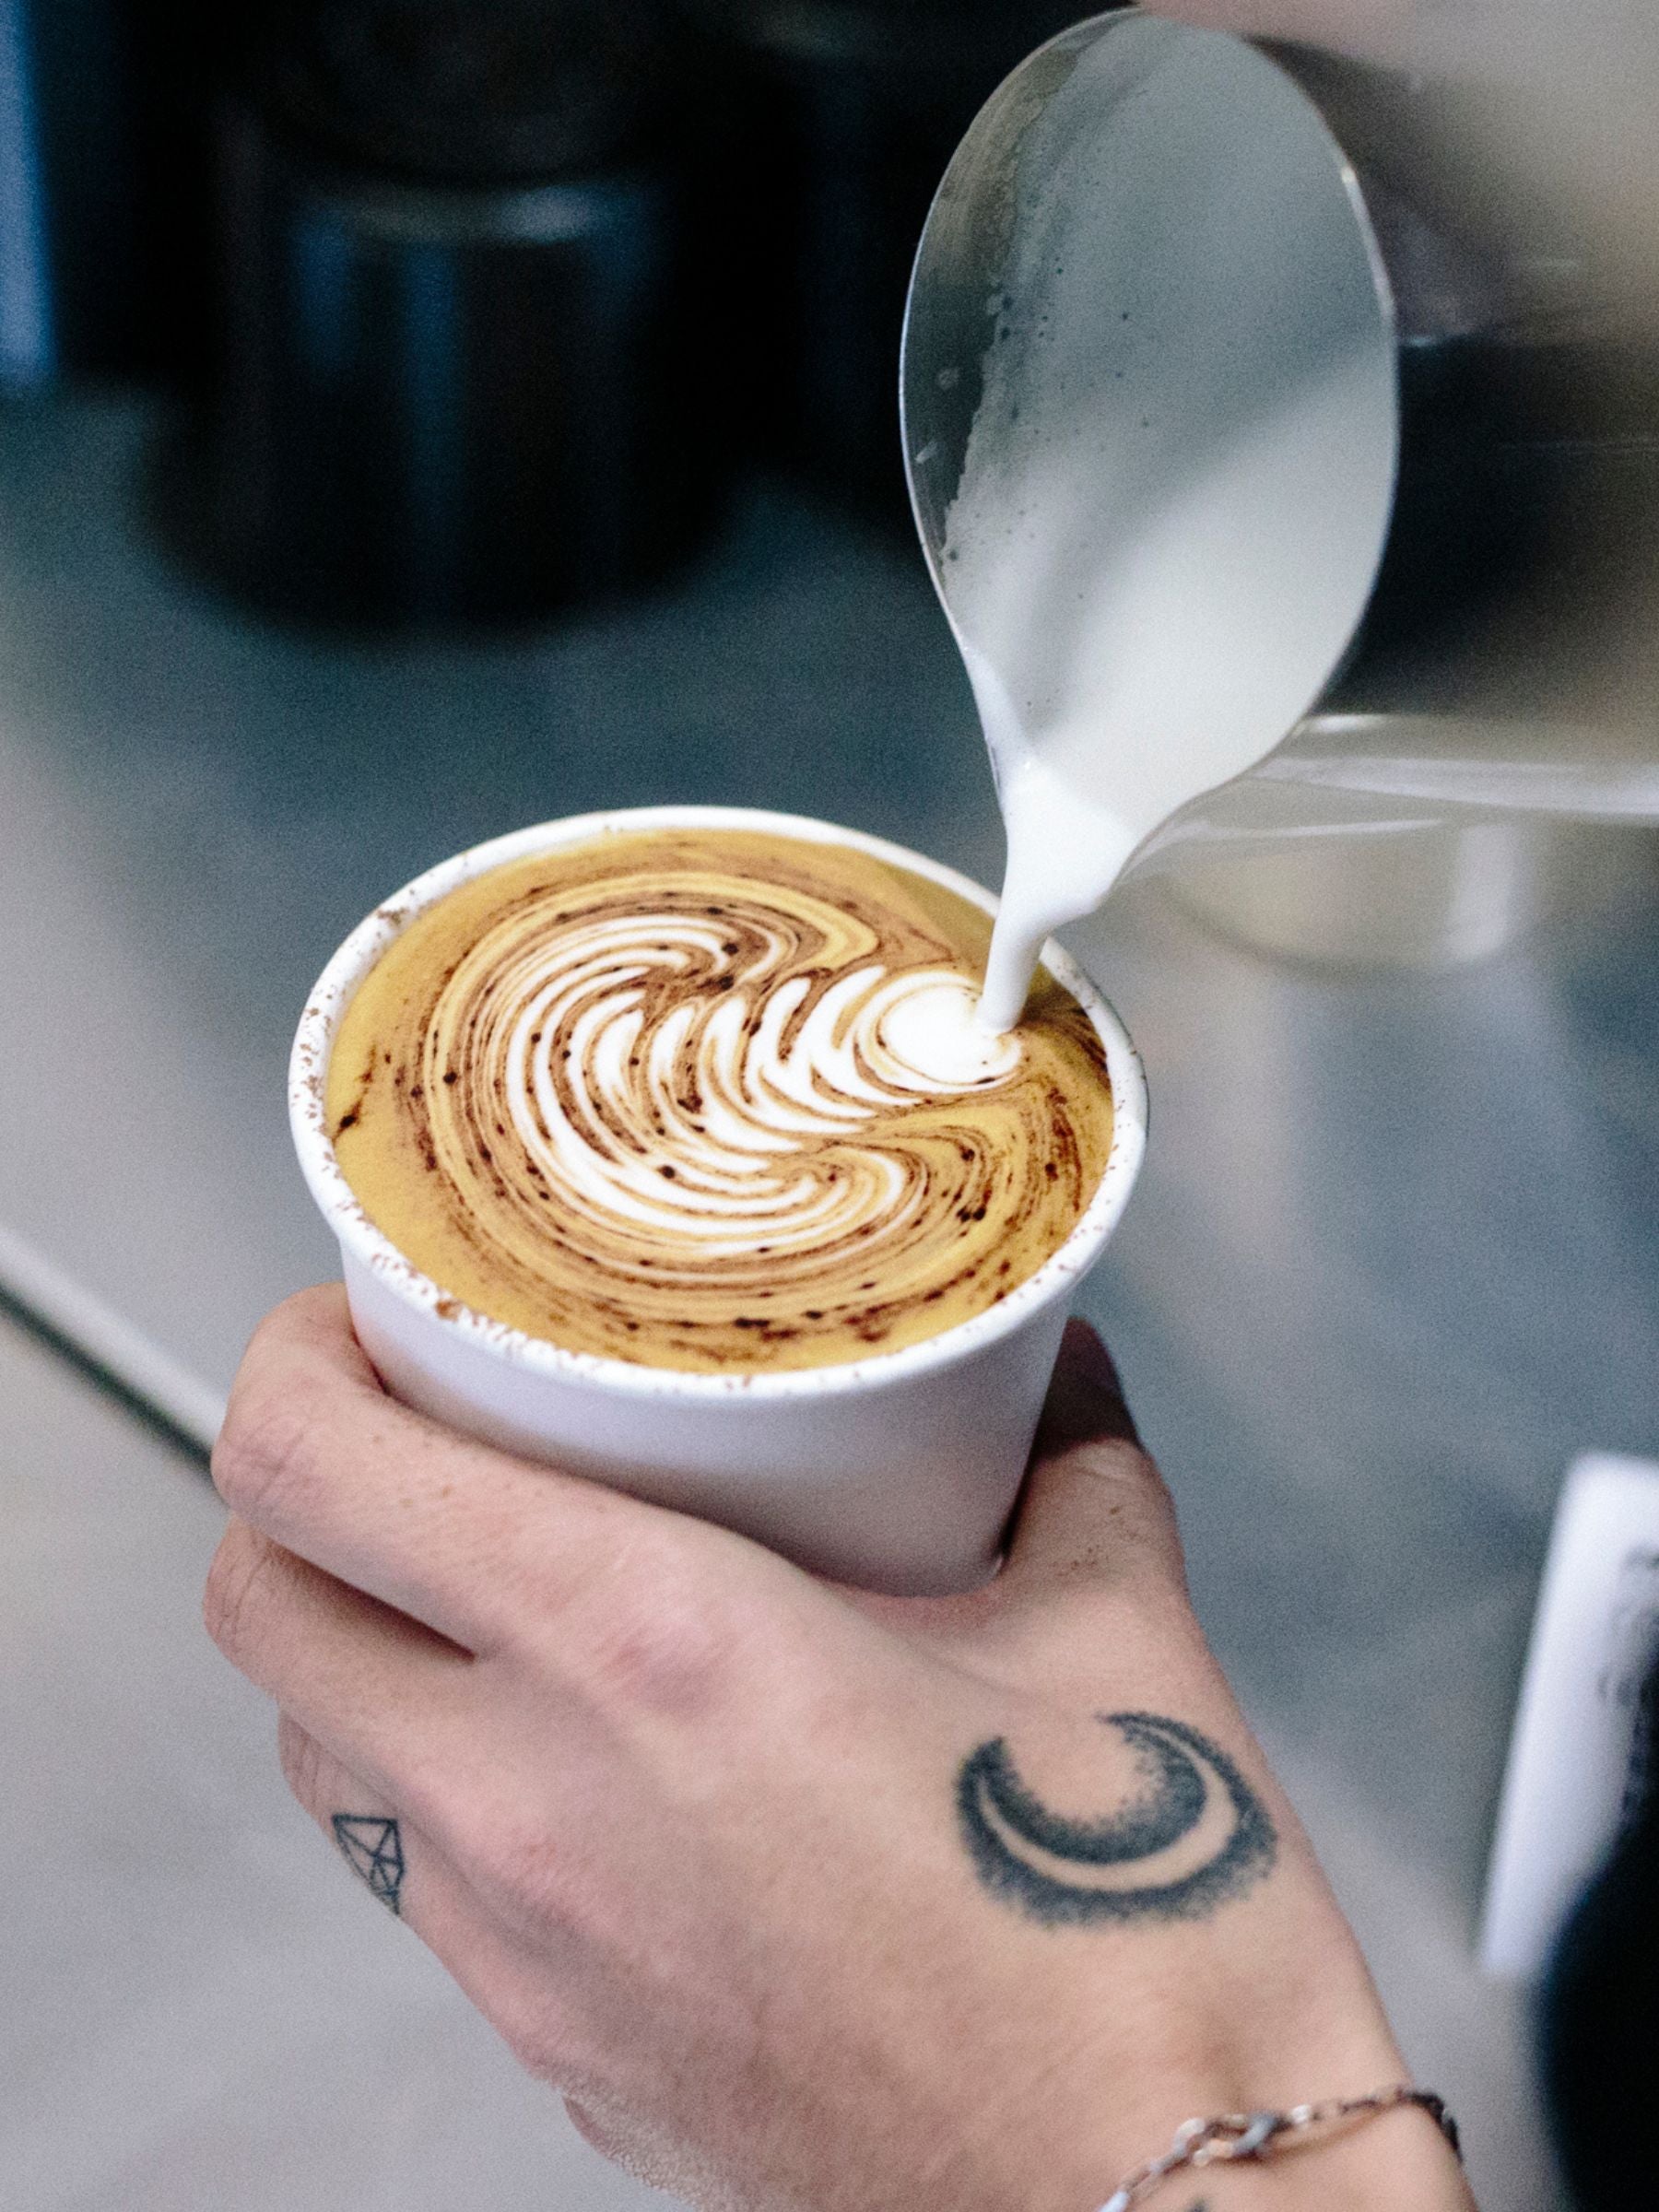 Latte art being poured into a takeaway coffee cup